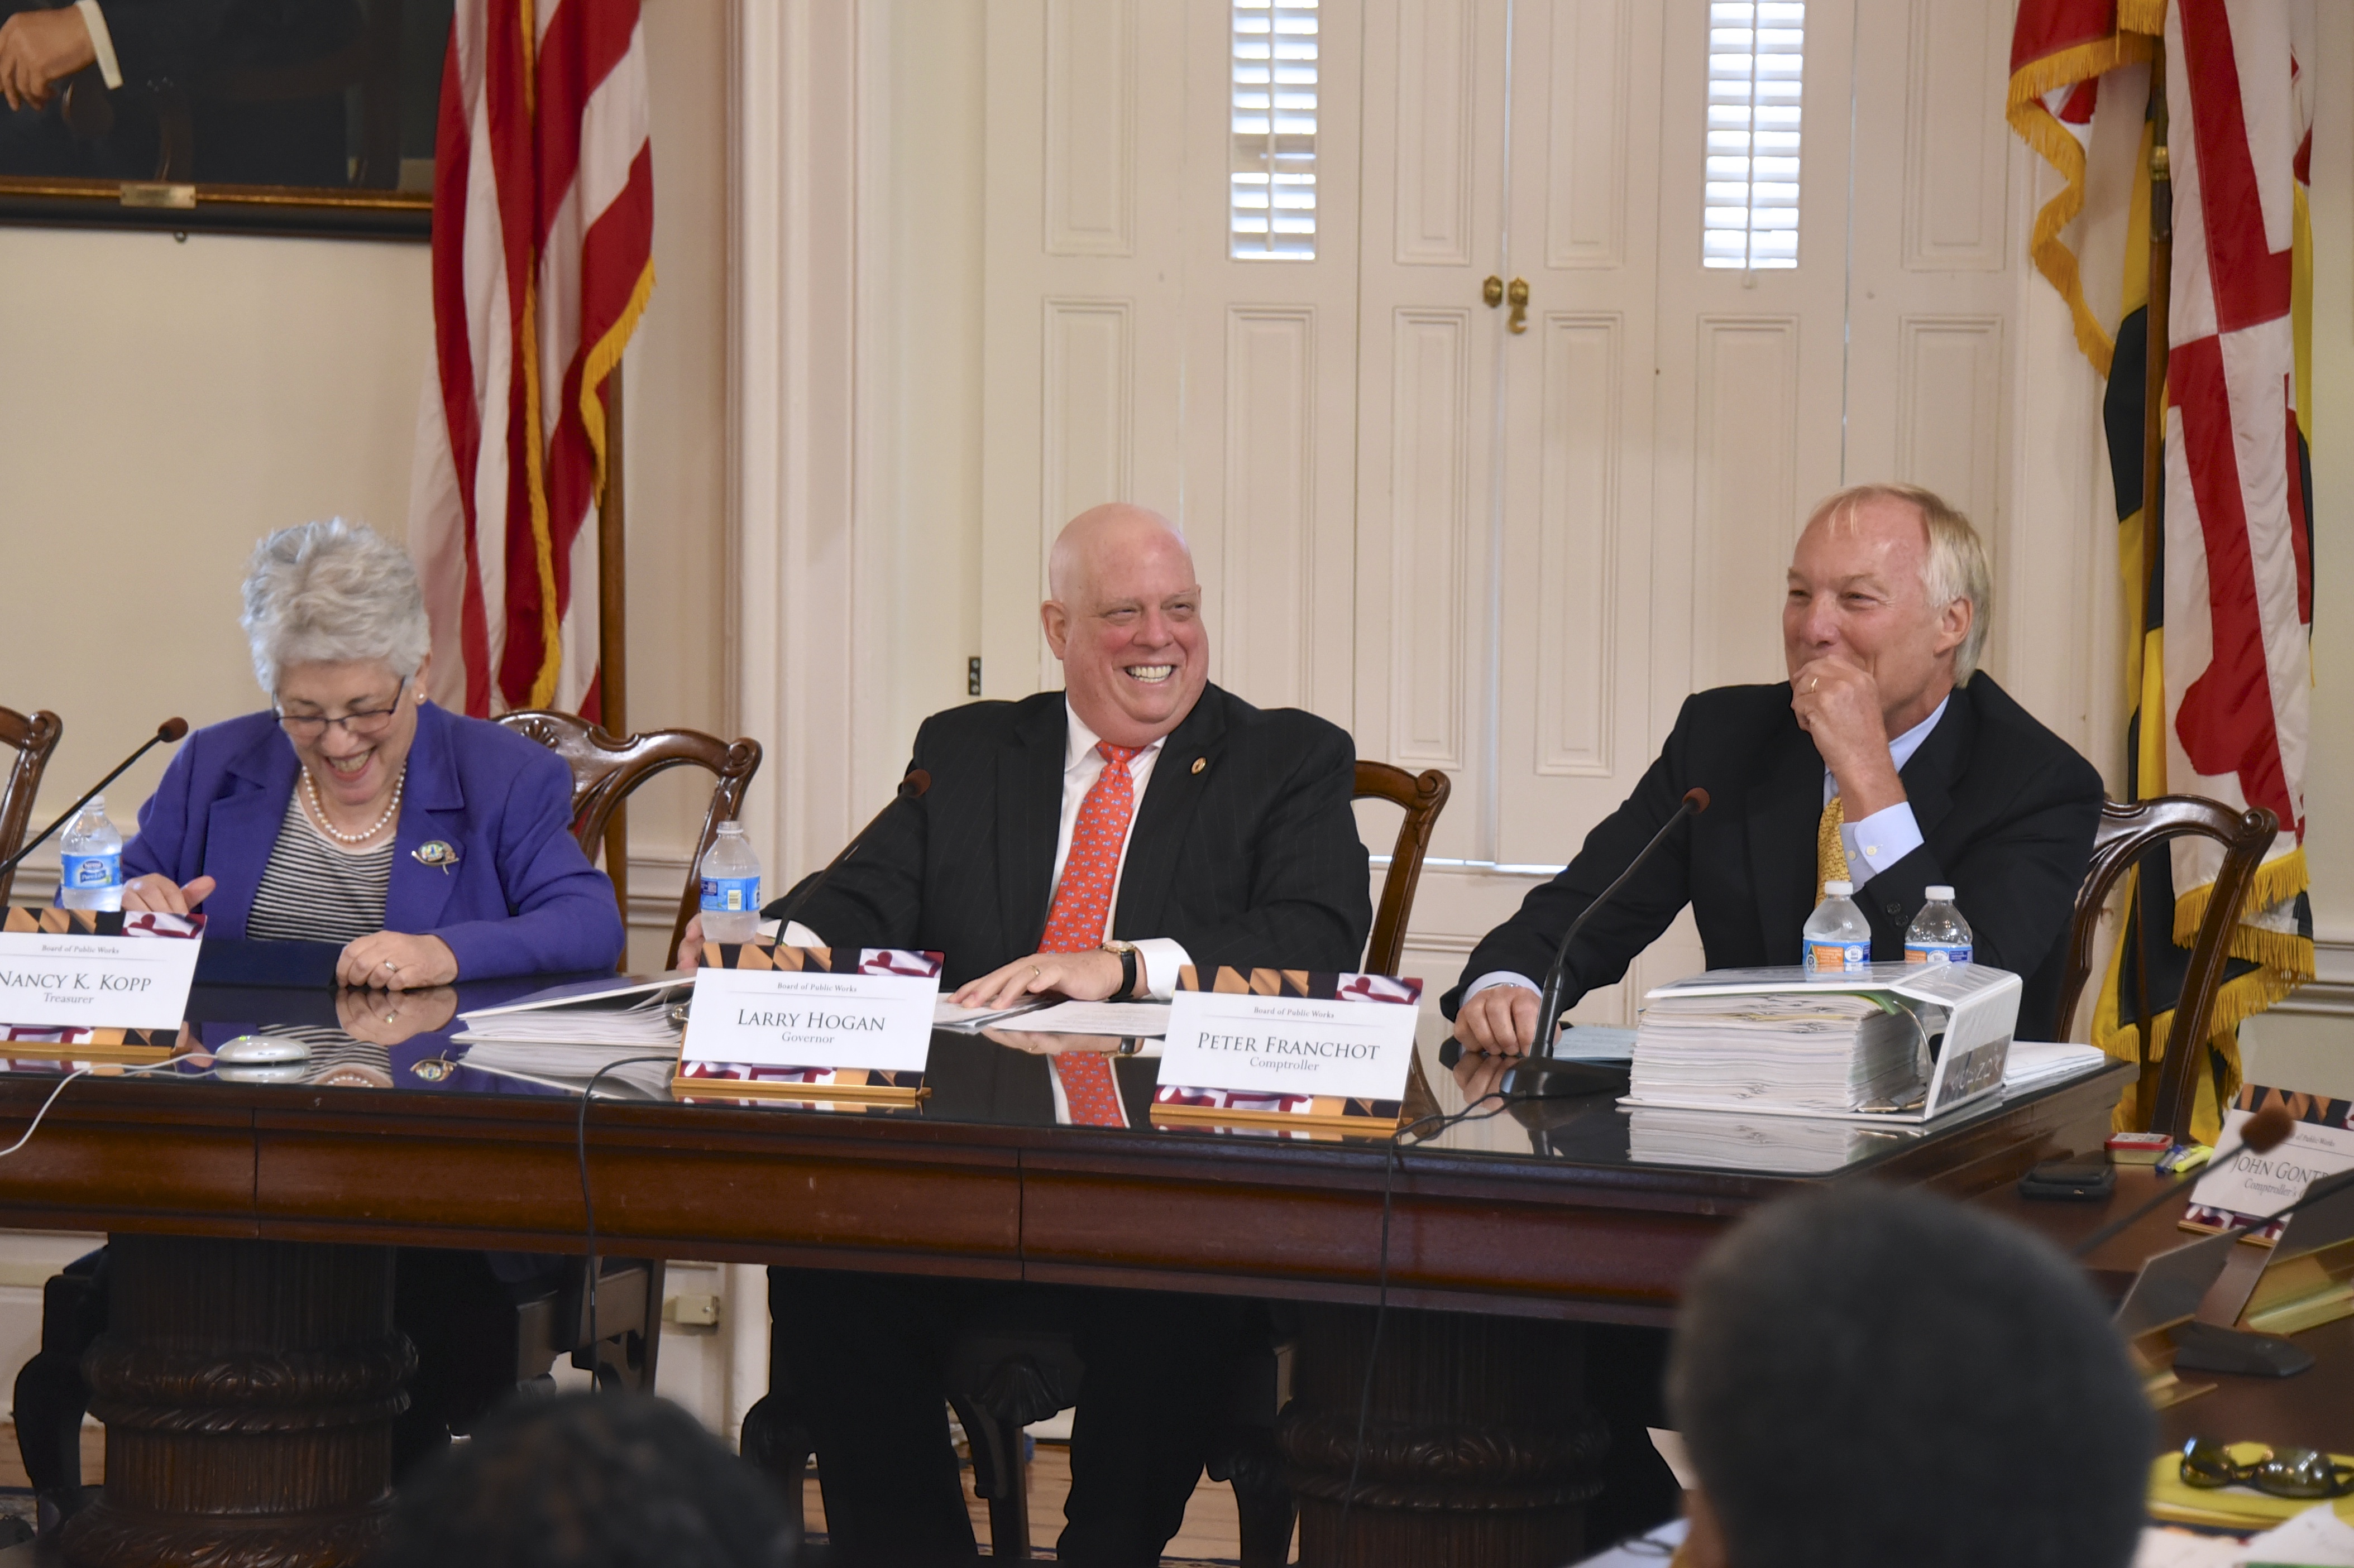 Hogan, Franchot blast state contractor over speaking payments to O’Malley